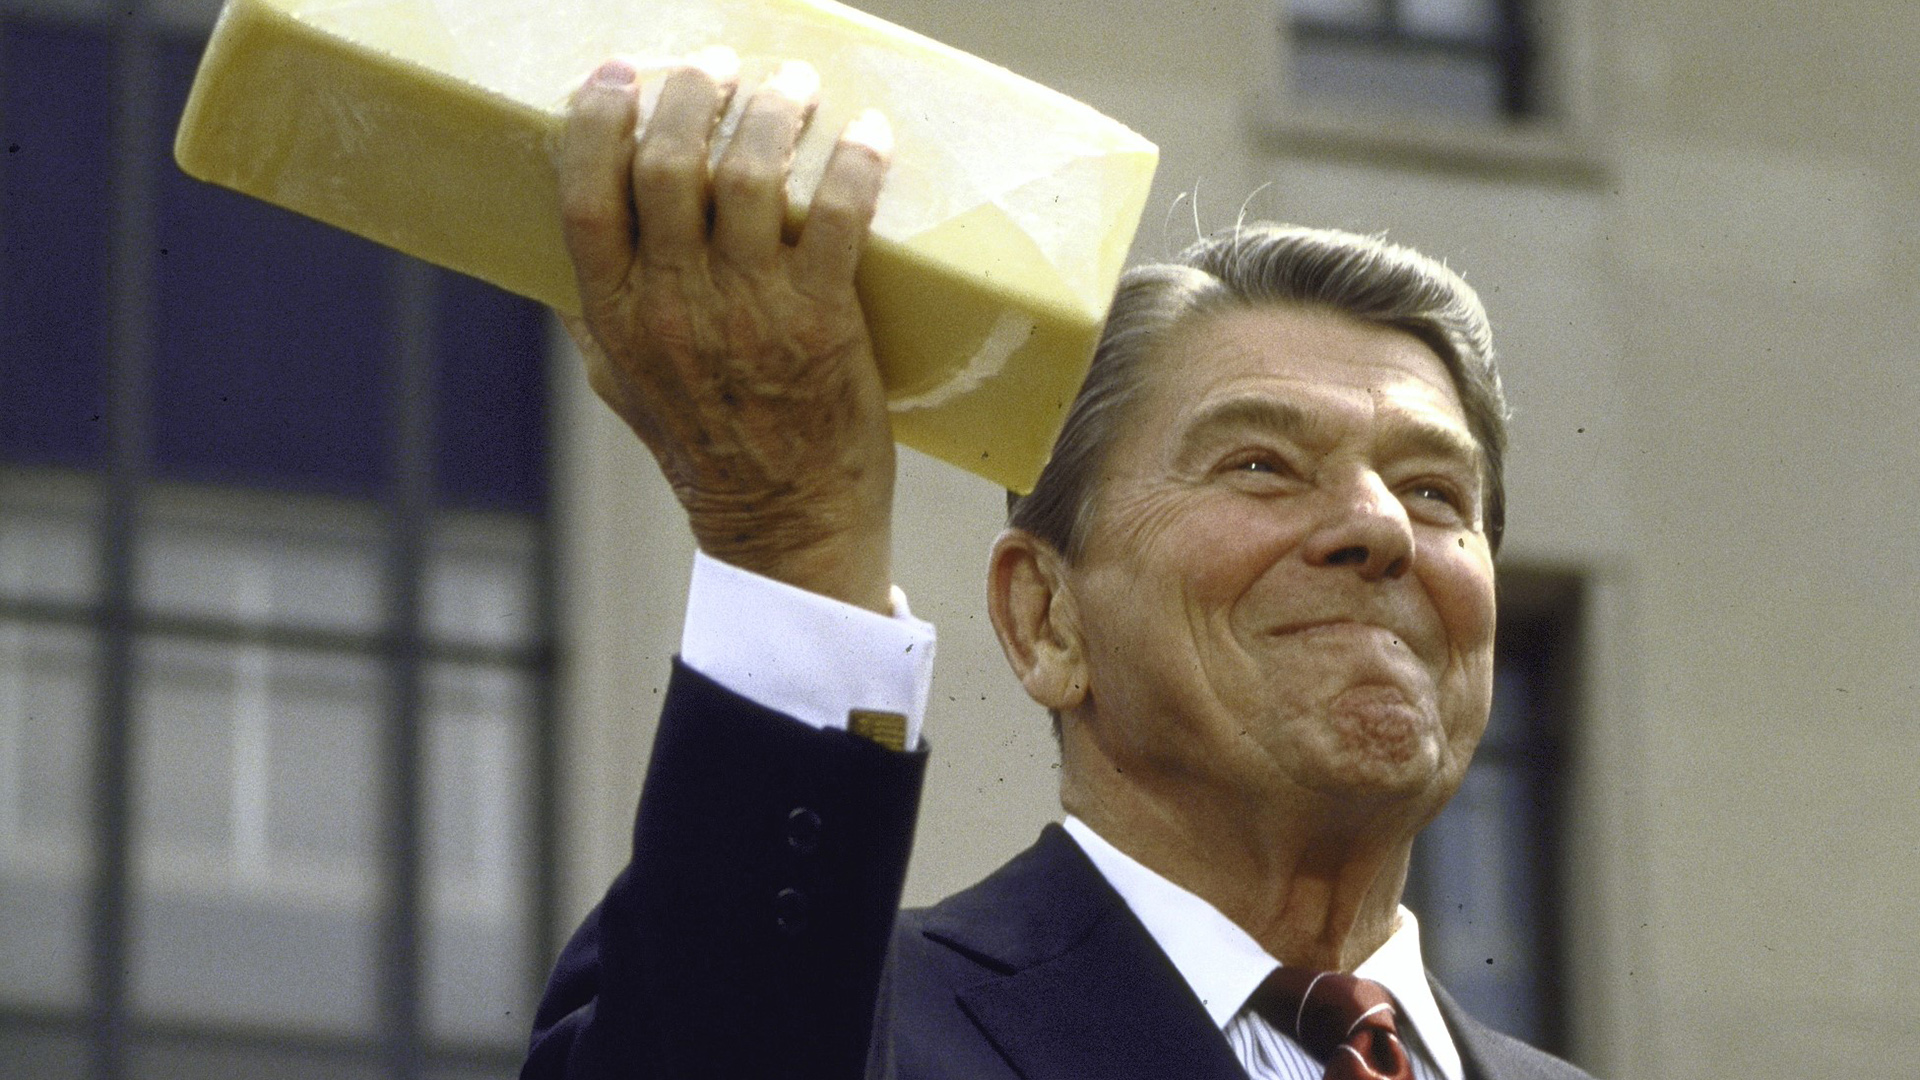 Ronald Reagan holds a large brick-sized piece of cheese in the air with his right hand while smiling.